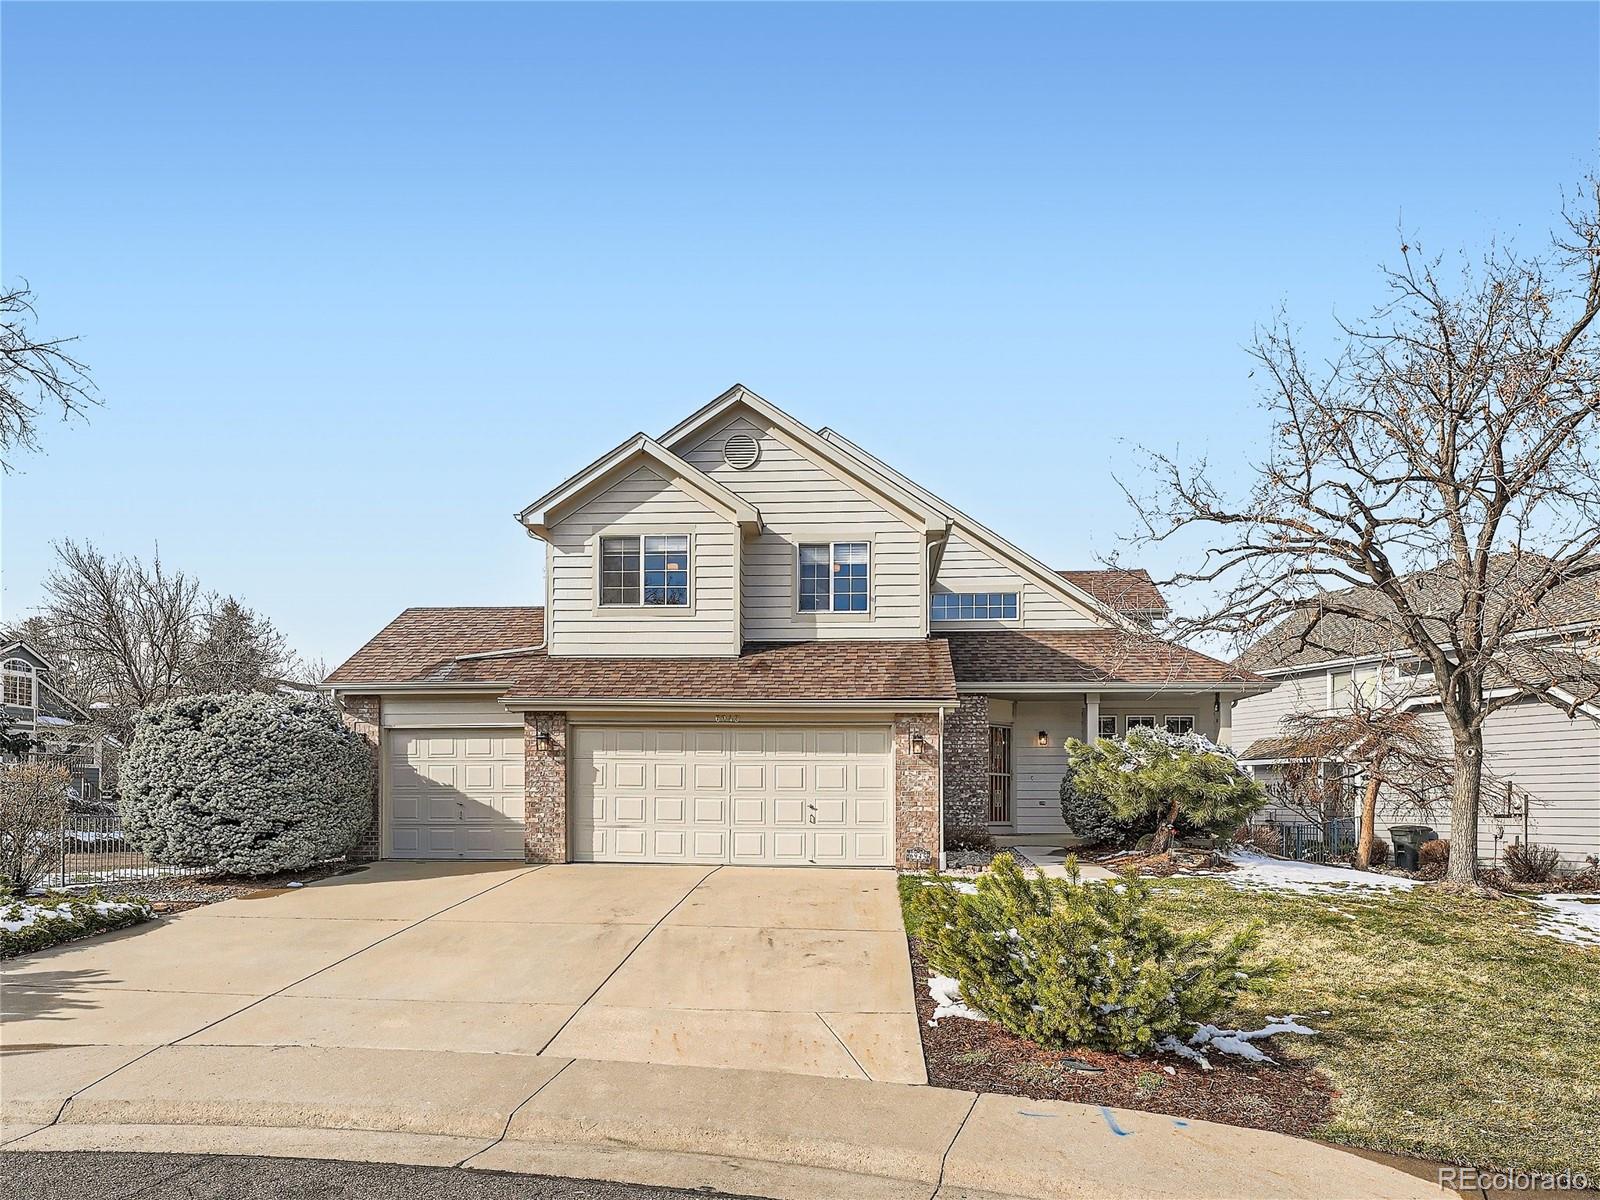 6945  nile court, Arvada sold home. Closed on 2024-04-17 for $865,000.